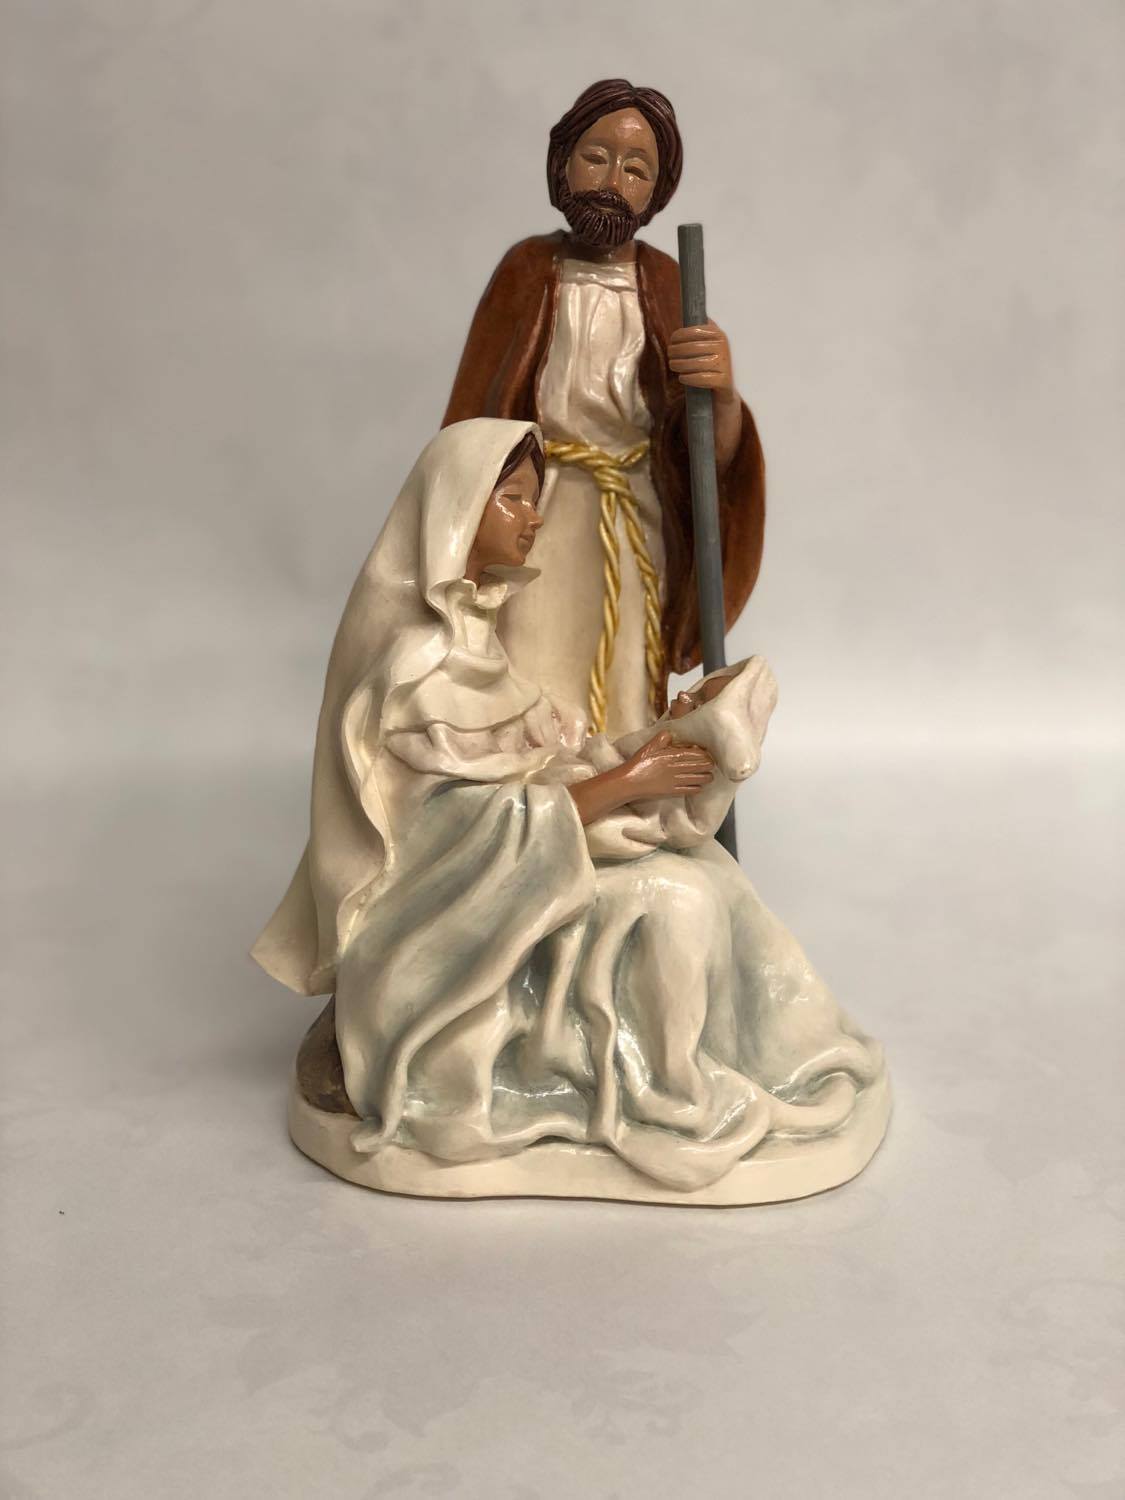 The Holy Family Figurine- "The Miracle of the season"